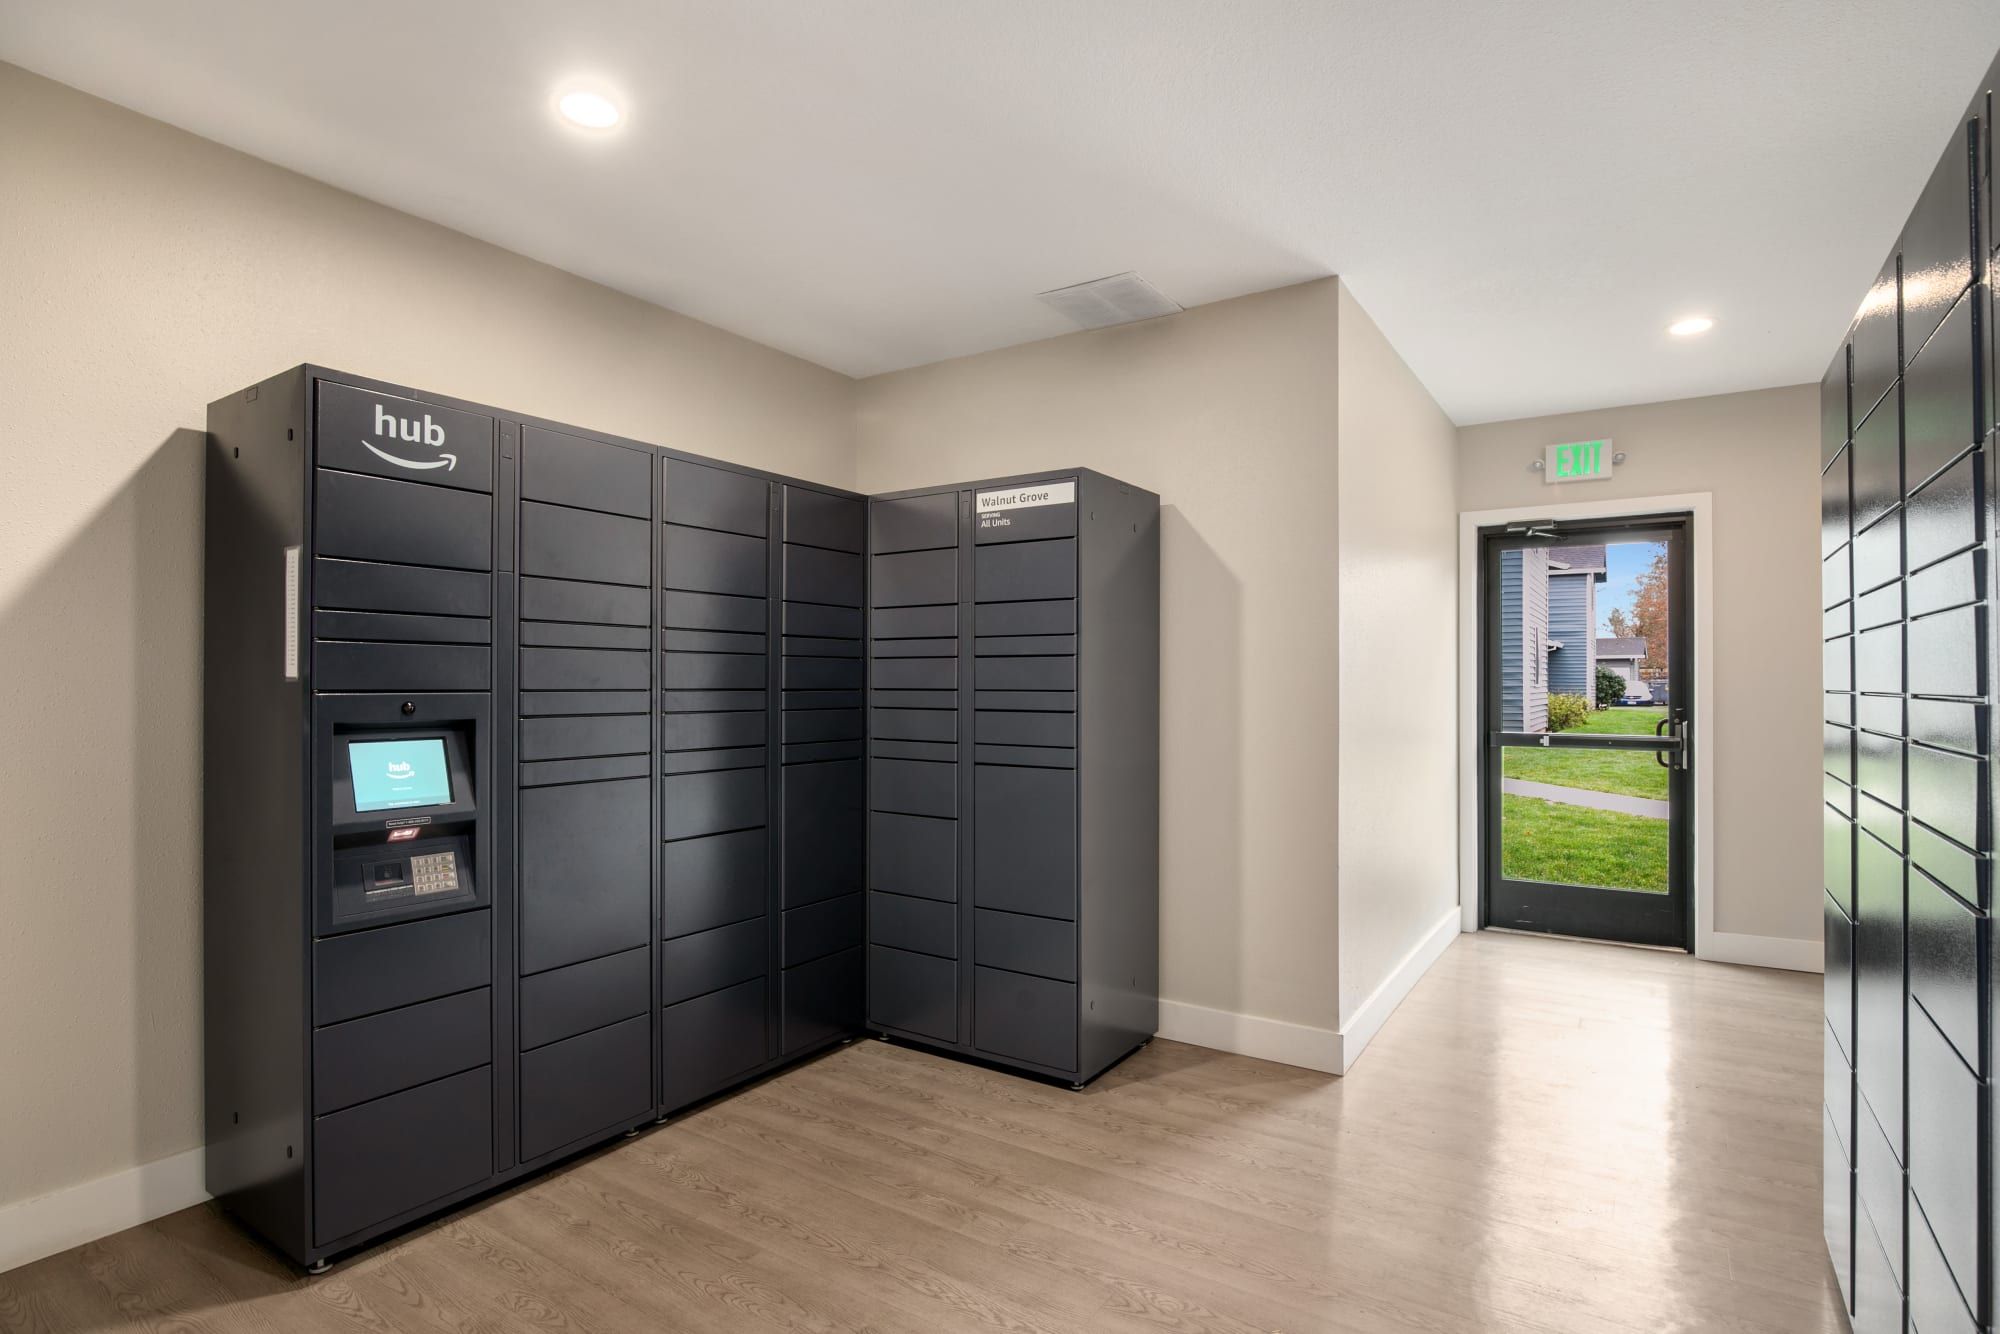 24-hour package lockers with Amazon HUB at Walnut Grove Landing Apartments in Vancouver, Washington